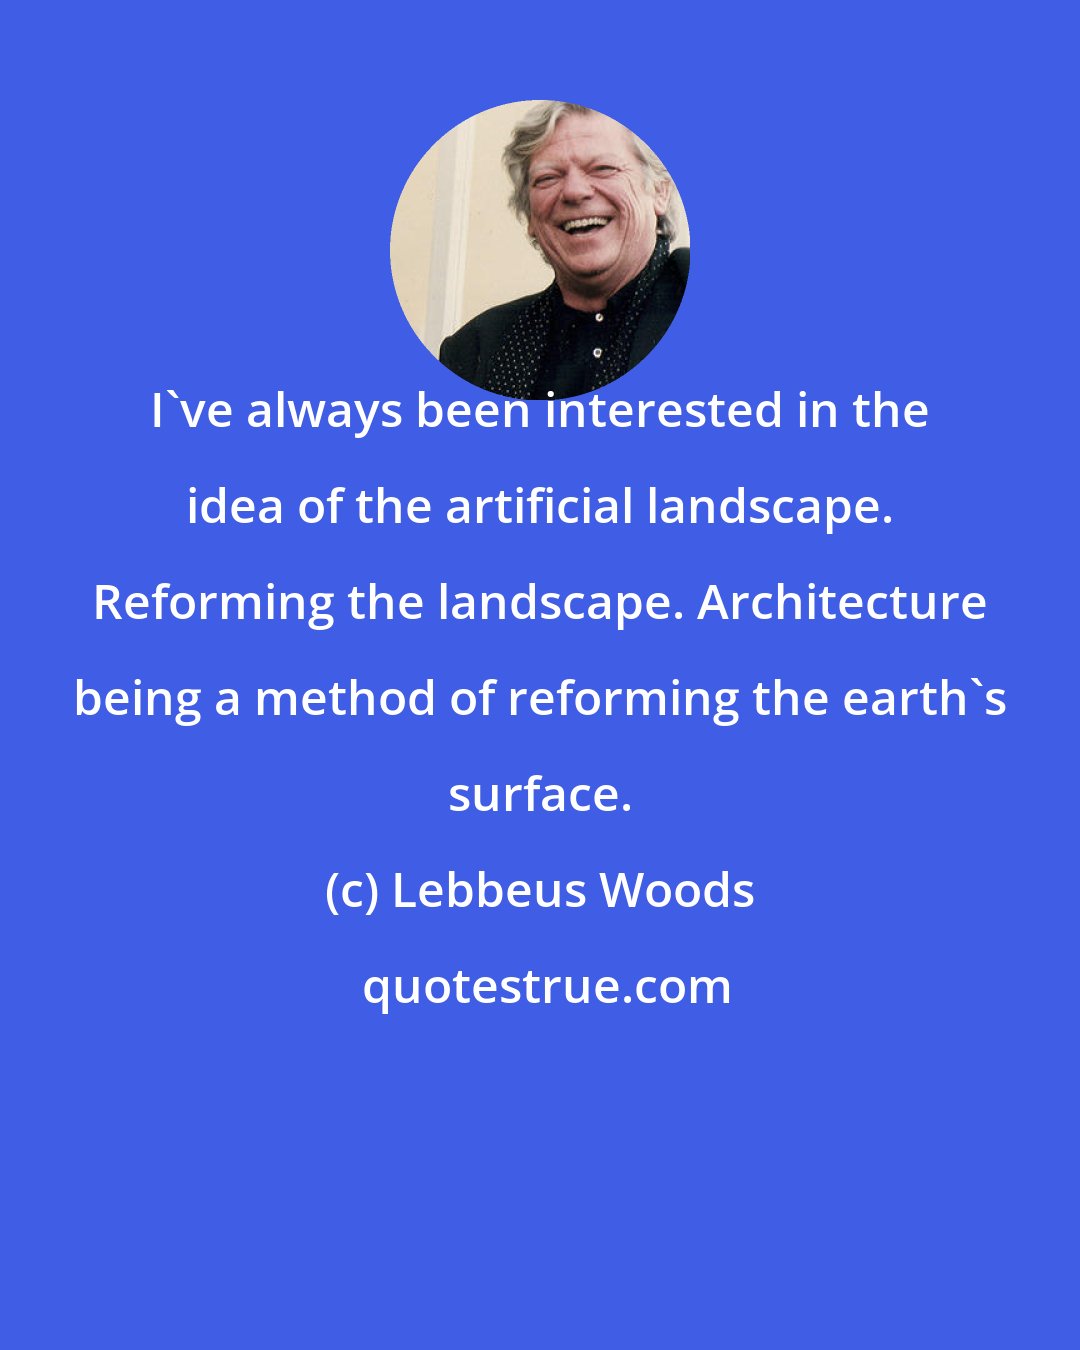 Lebbeus Woods: I've always been interested in the idea of the artificial landscape. Reforming the landscape. Architecture being a method of reforming the earth's surface.